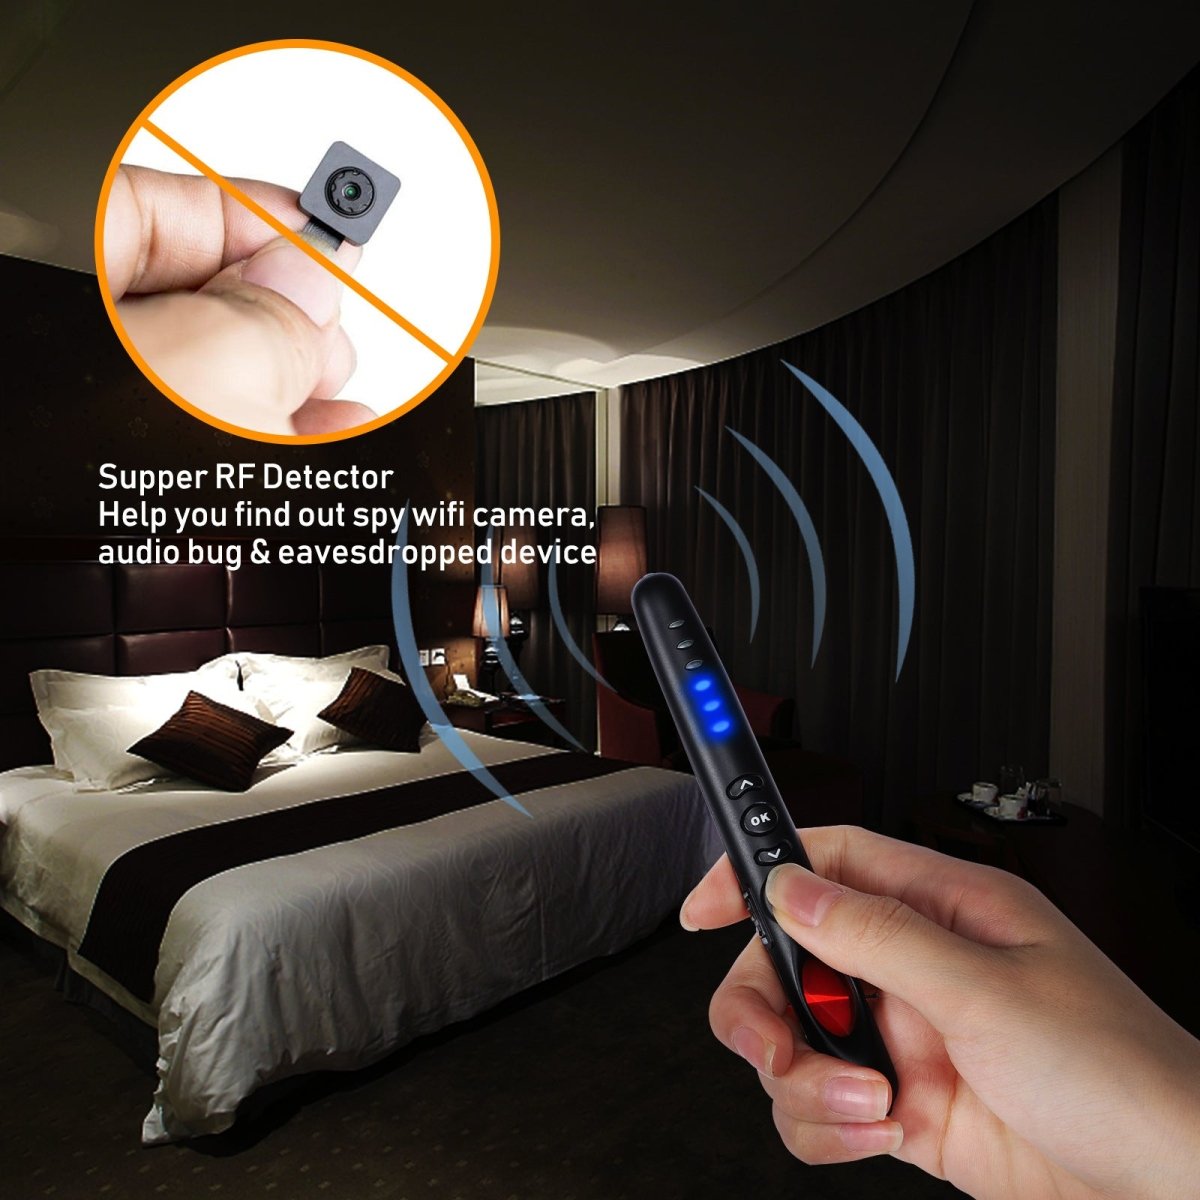 Protect Your Privacy with Our Hotel Camera Detector - Say No to Eavesdropping! - InspiredGrabs.com